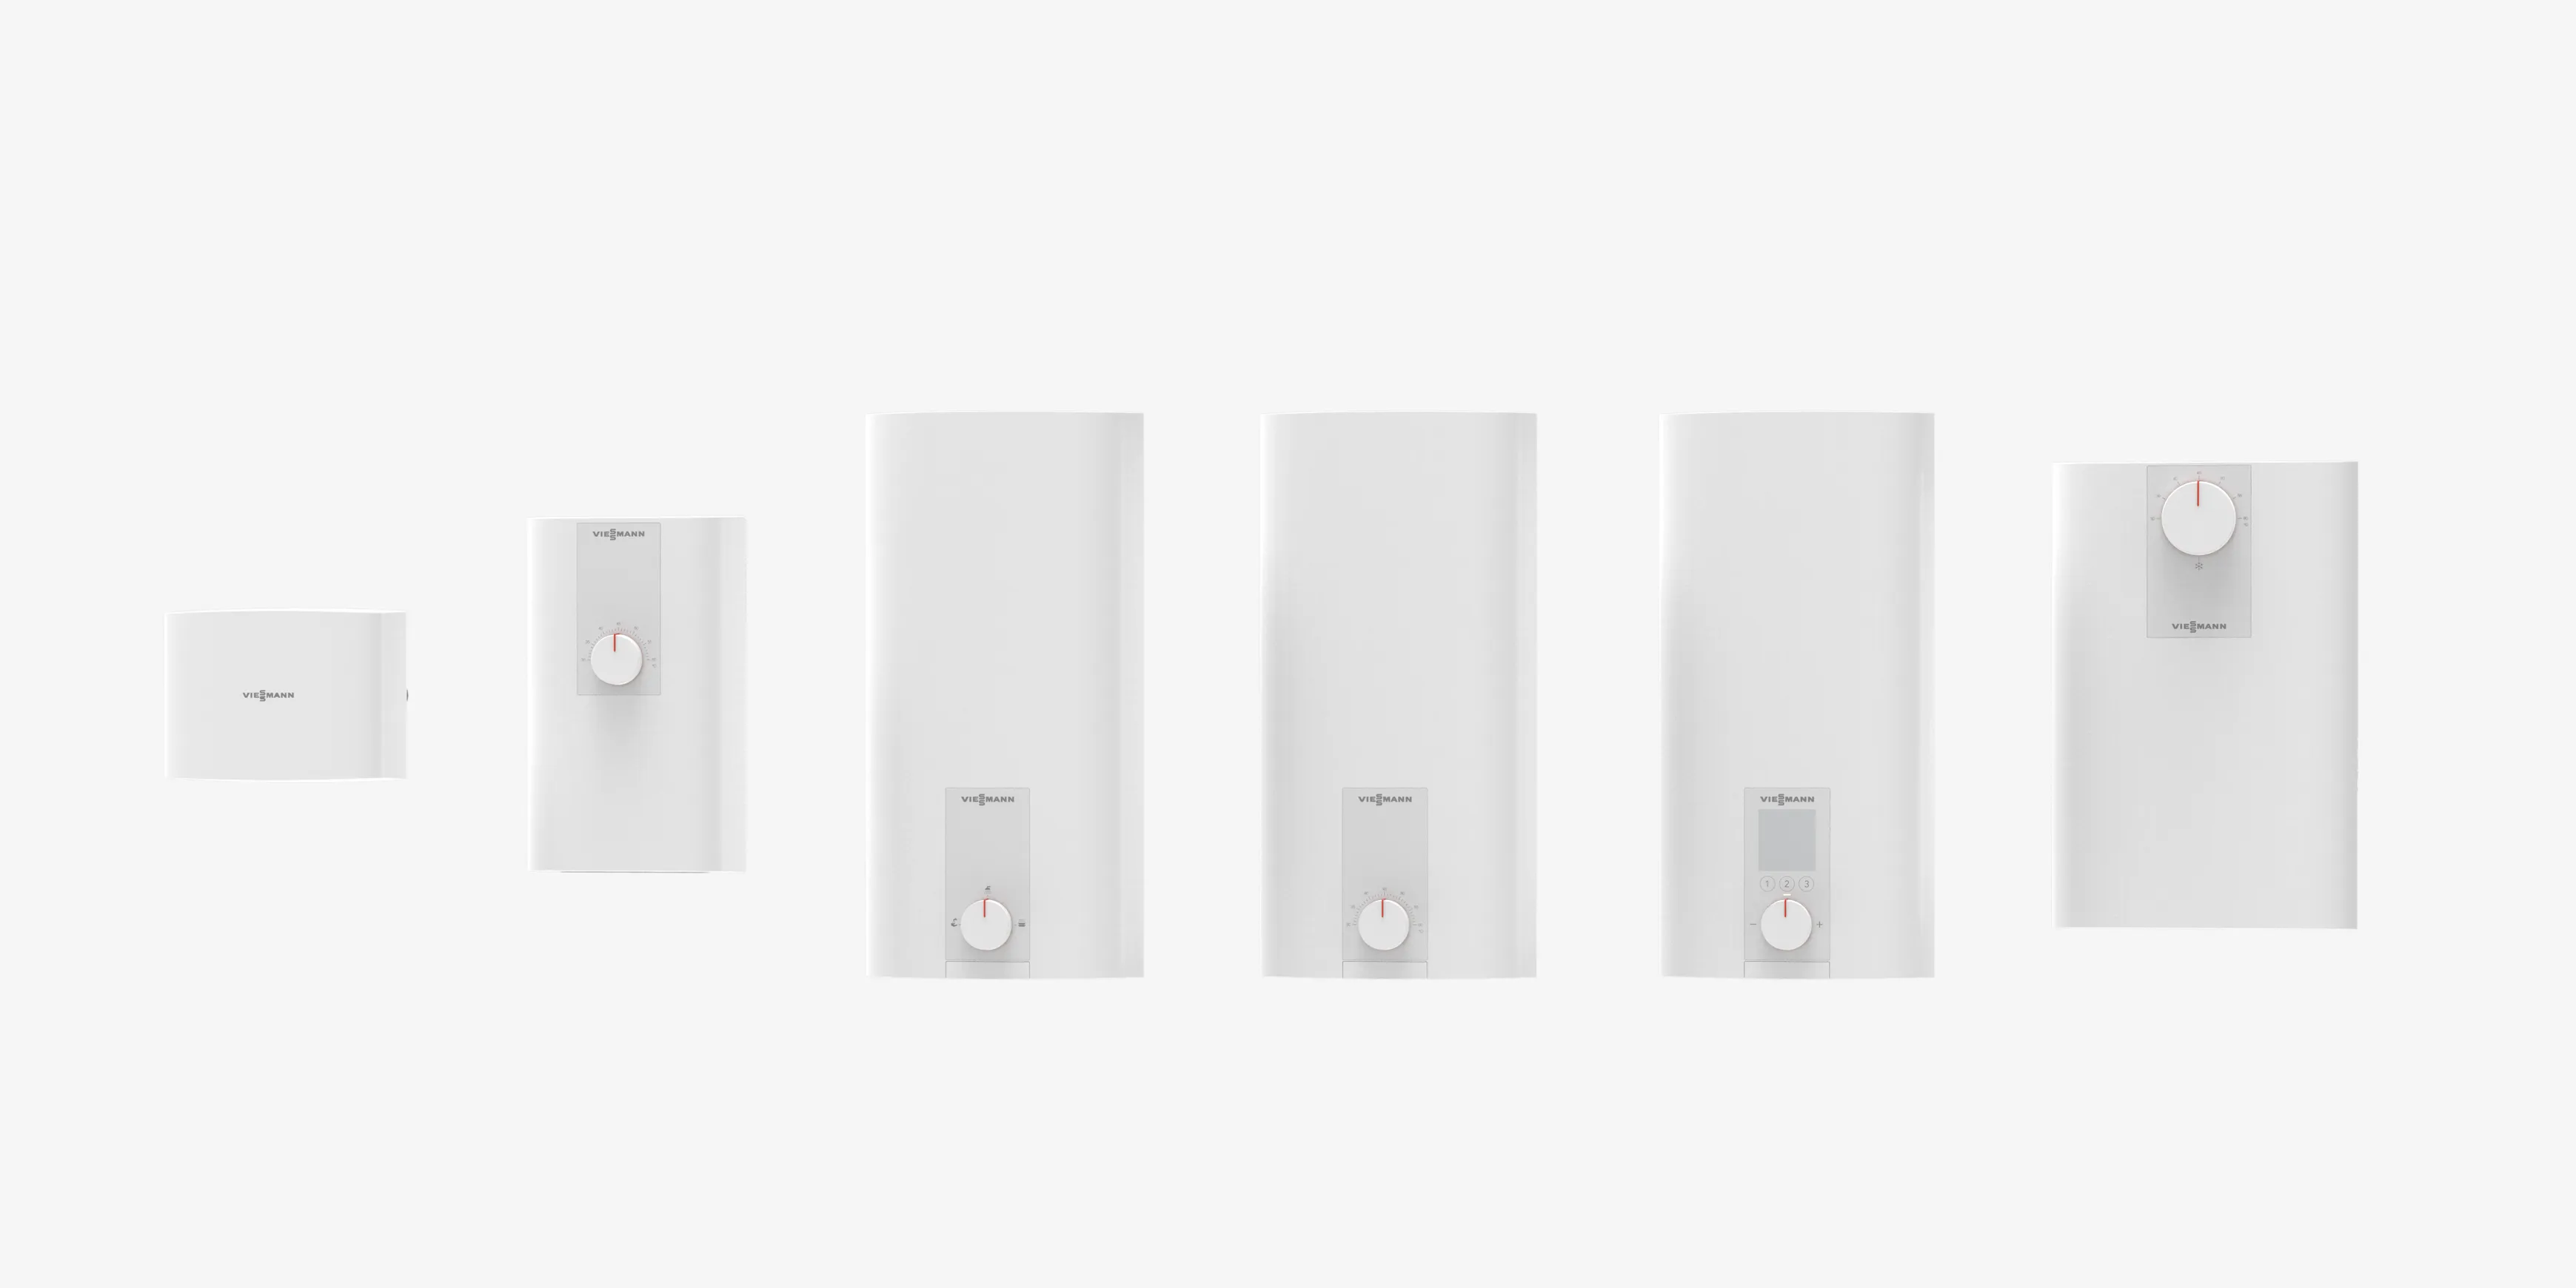 The Viessmann Vitotherm product family in front of a grey background